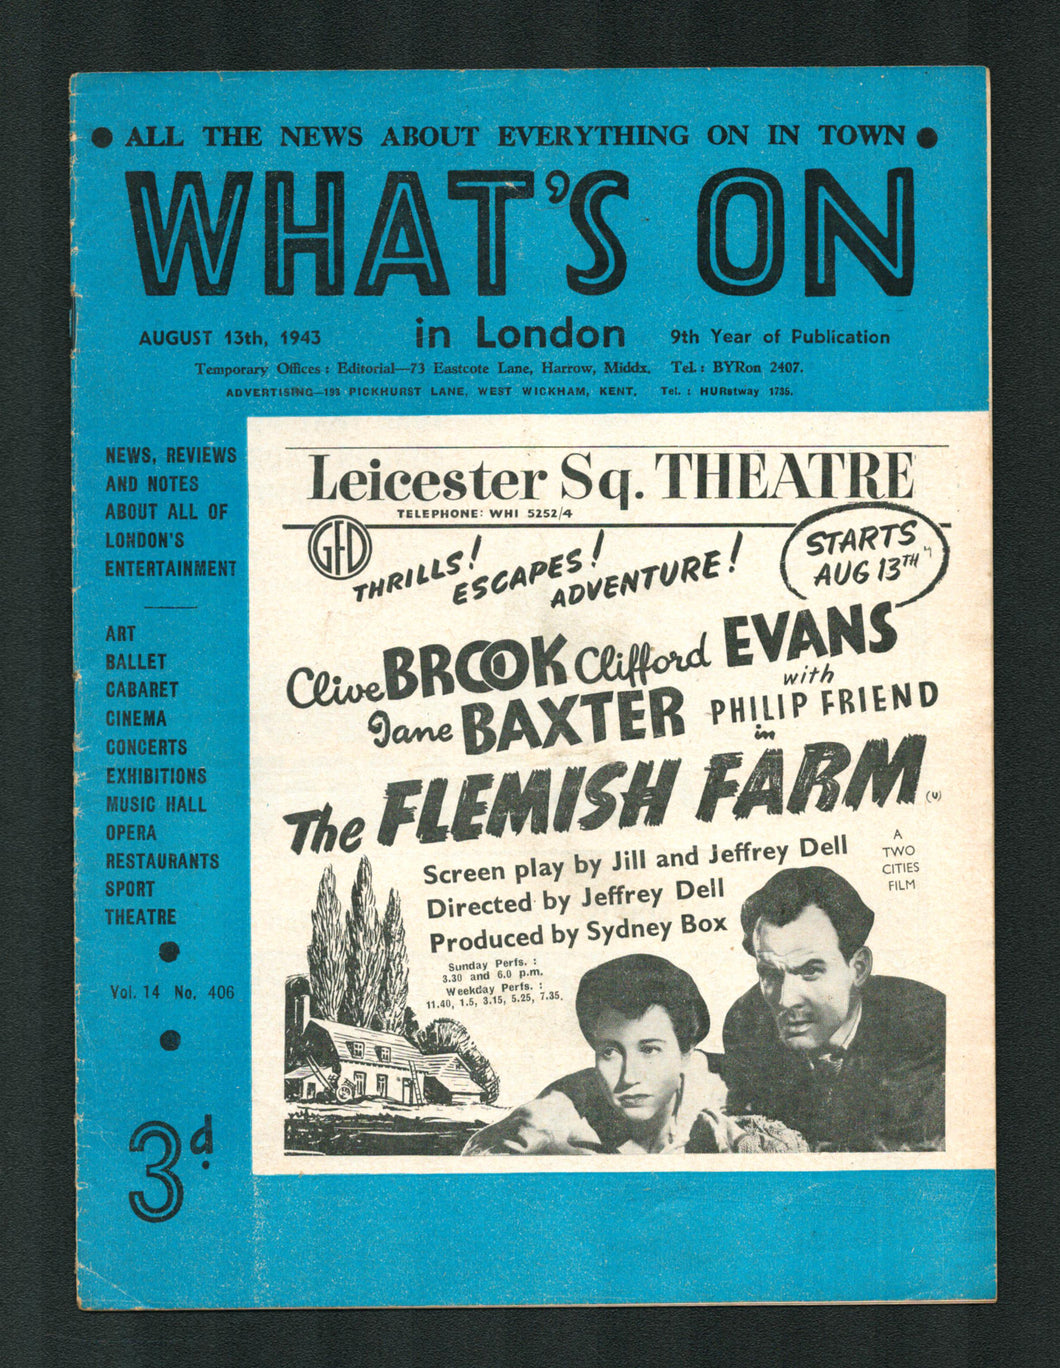 Whats on in London No 406 Aug 13 1943